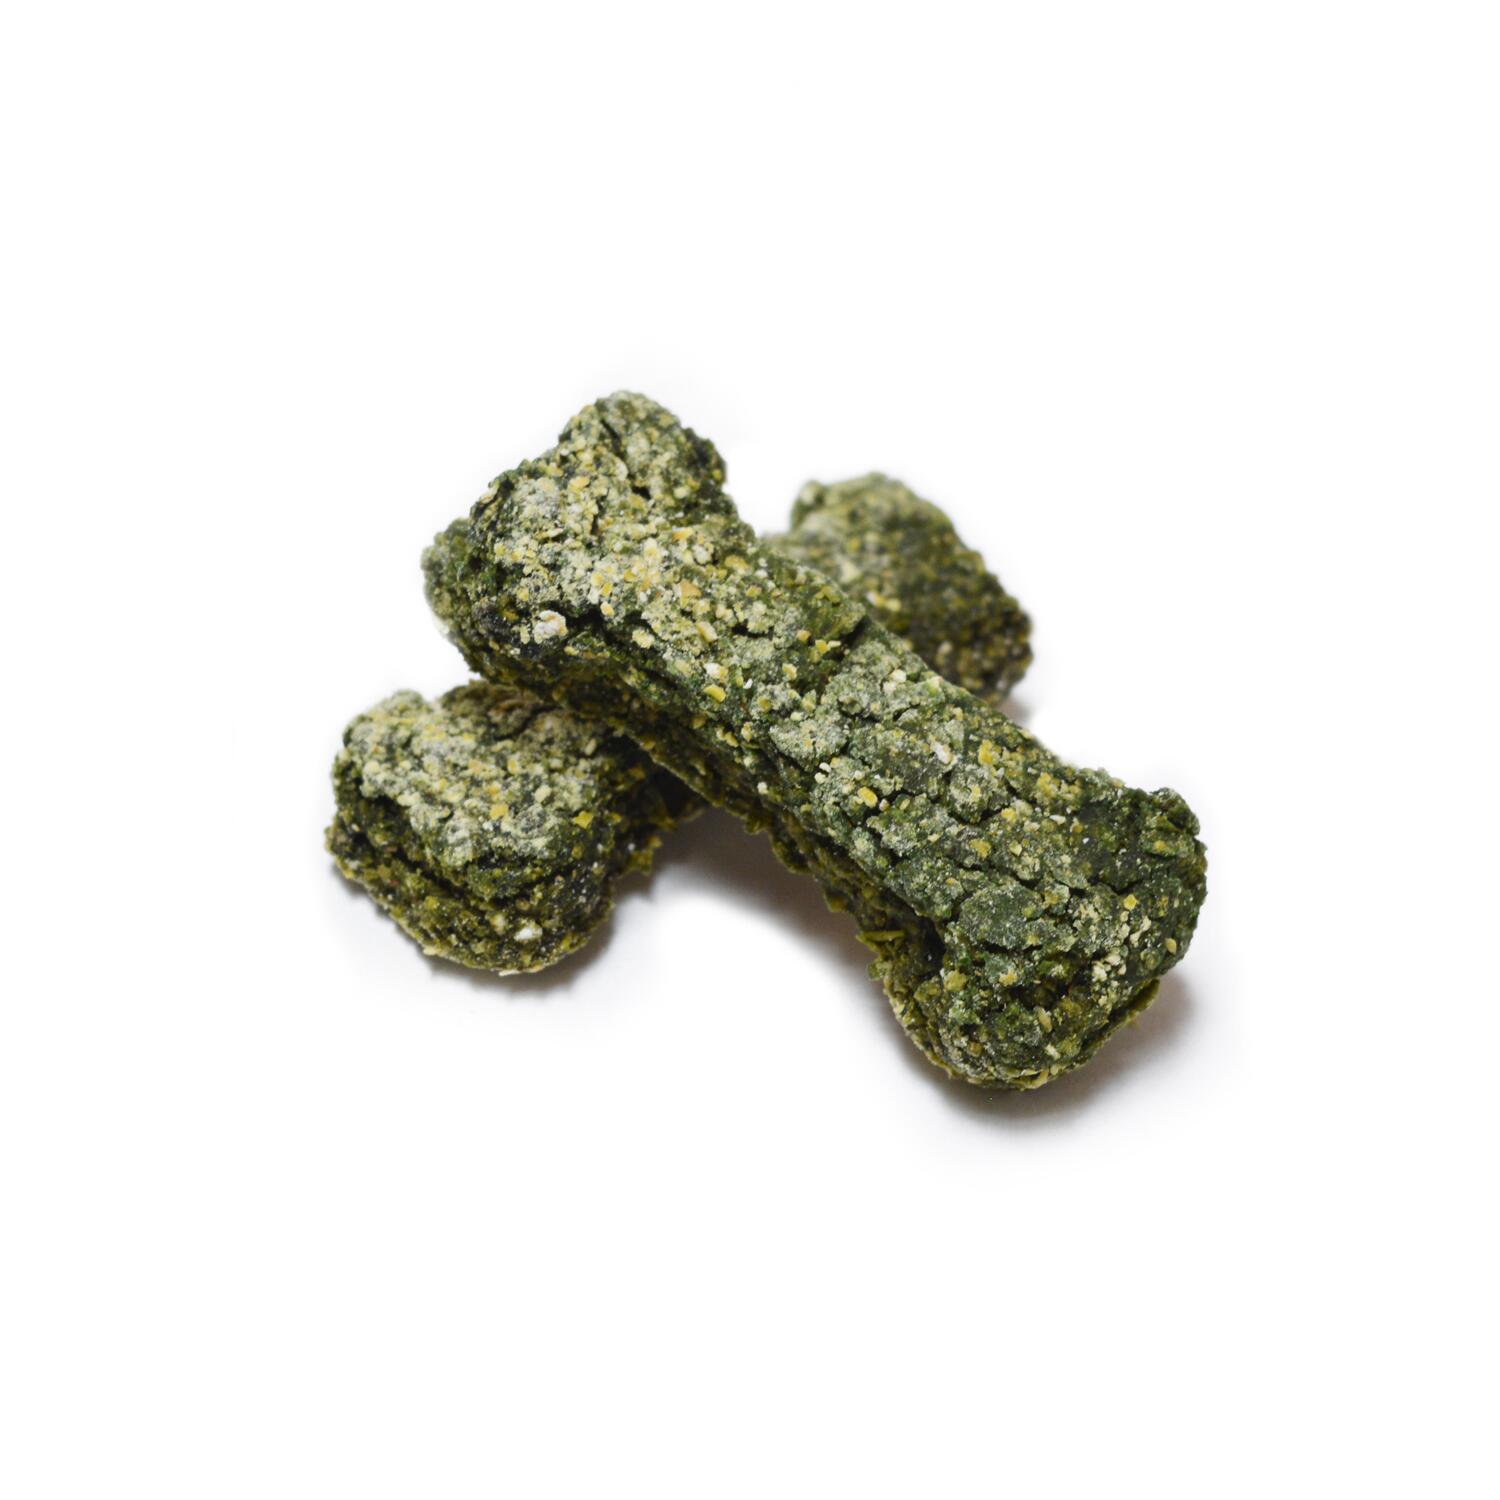 Two Booster Small Pea, Peanut Butter and Spirulina vegan bone shaped dog biscuits